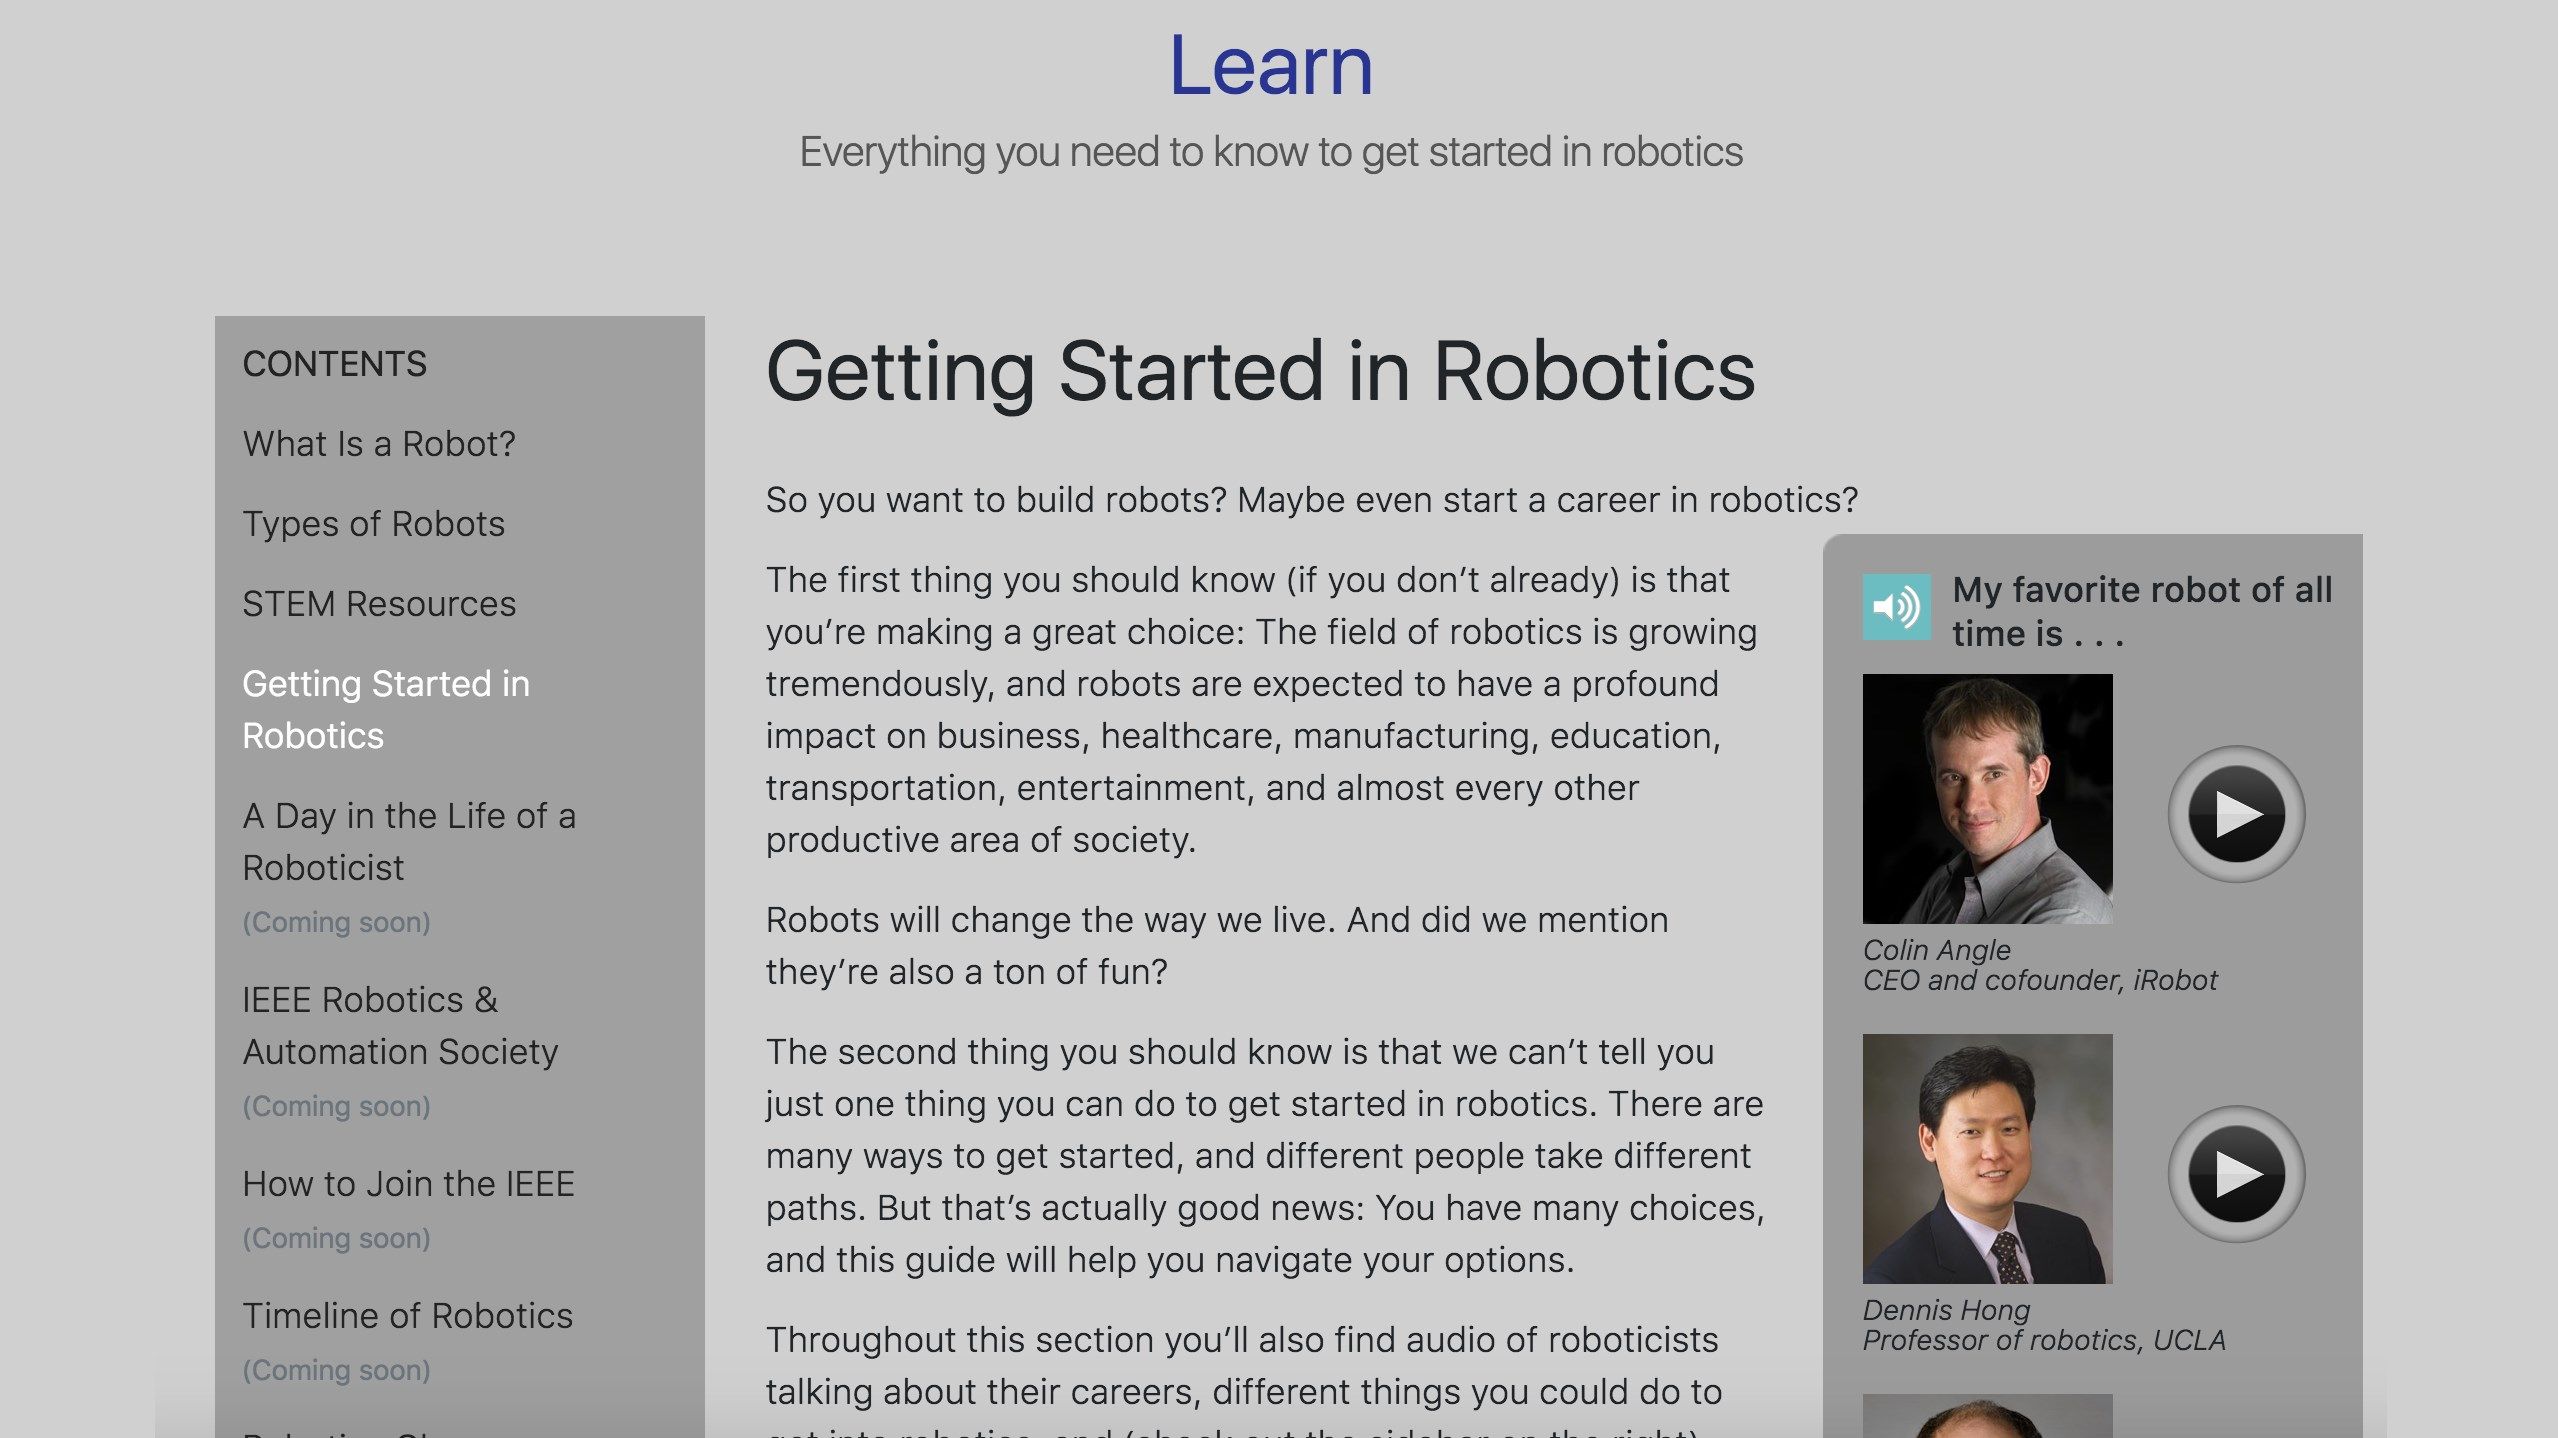 Learn how to get started in robotics